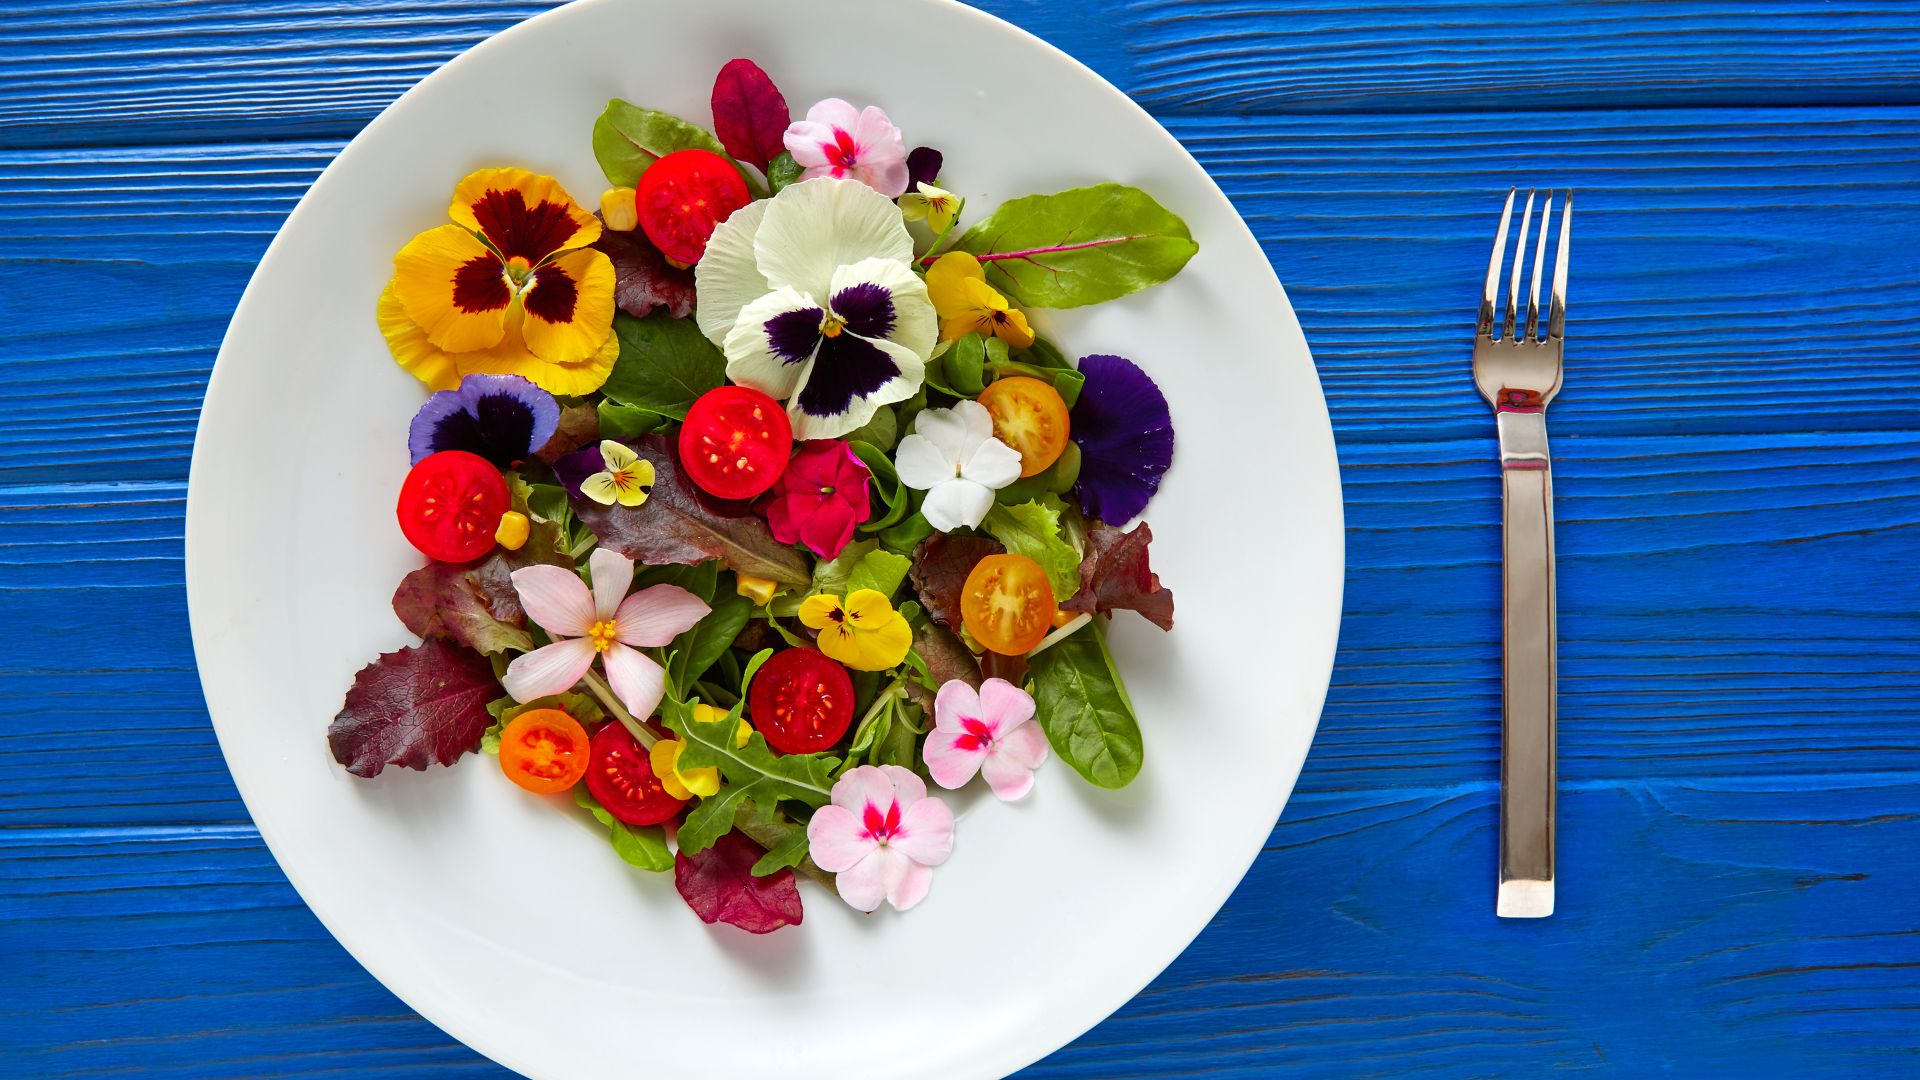 Edible Pansies and 7 Other Edible Flowers for Chefs to Use